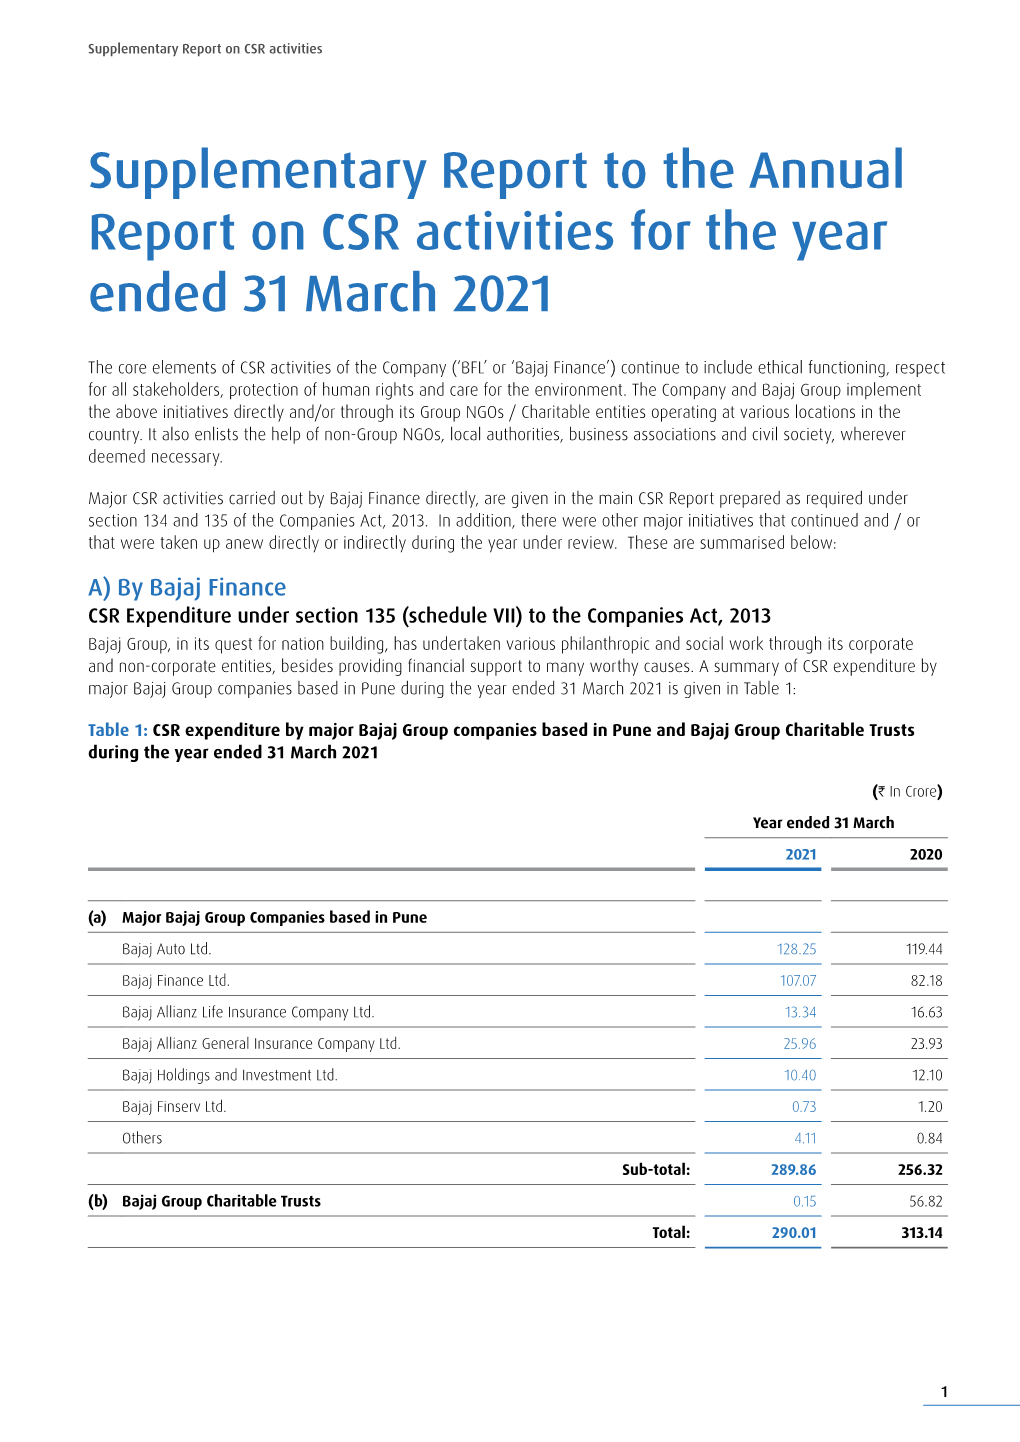 Supplementary Report to the Annual Report on CSR Activities for the Year Ended 31 March 2021